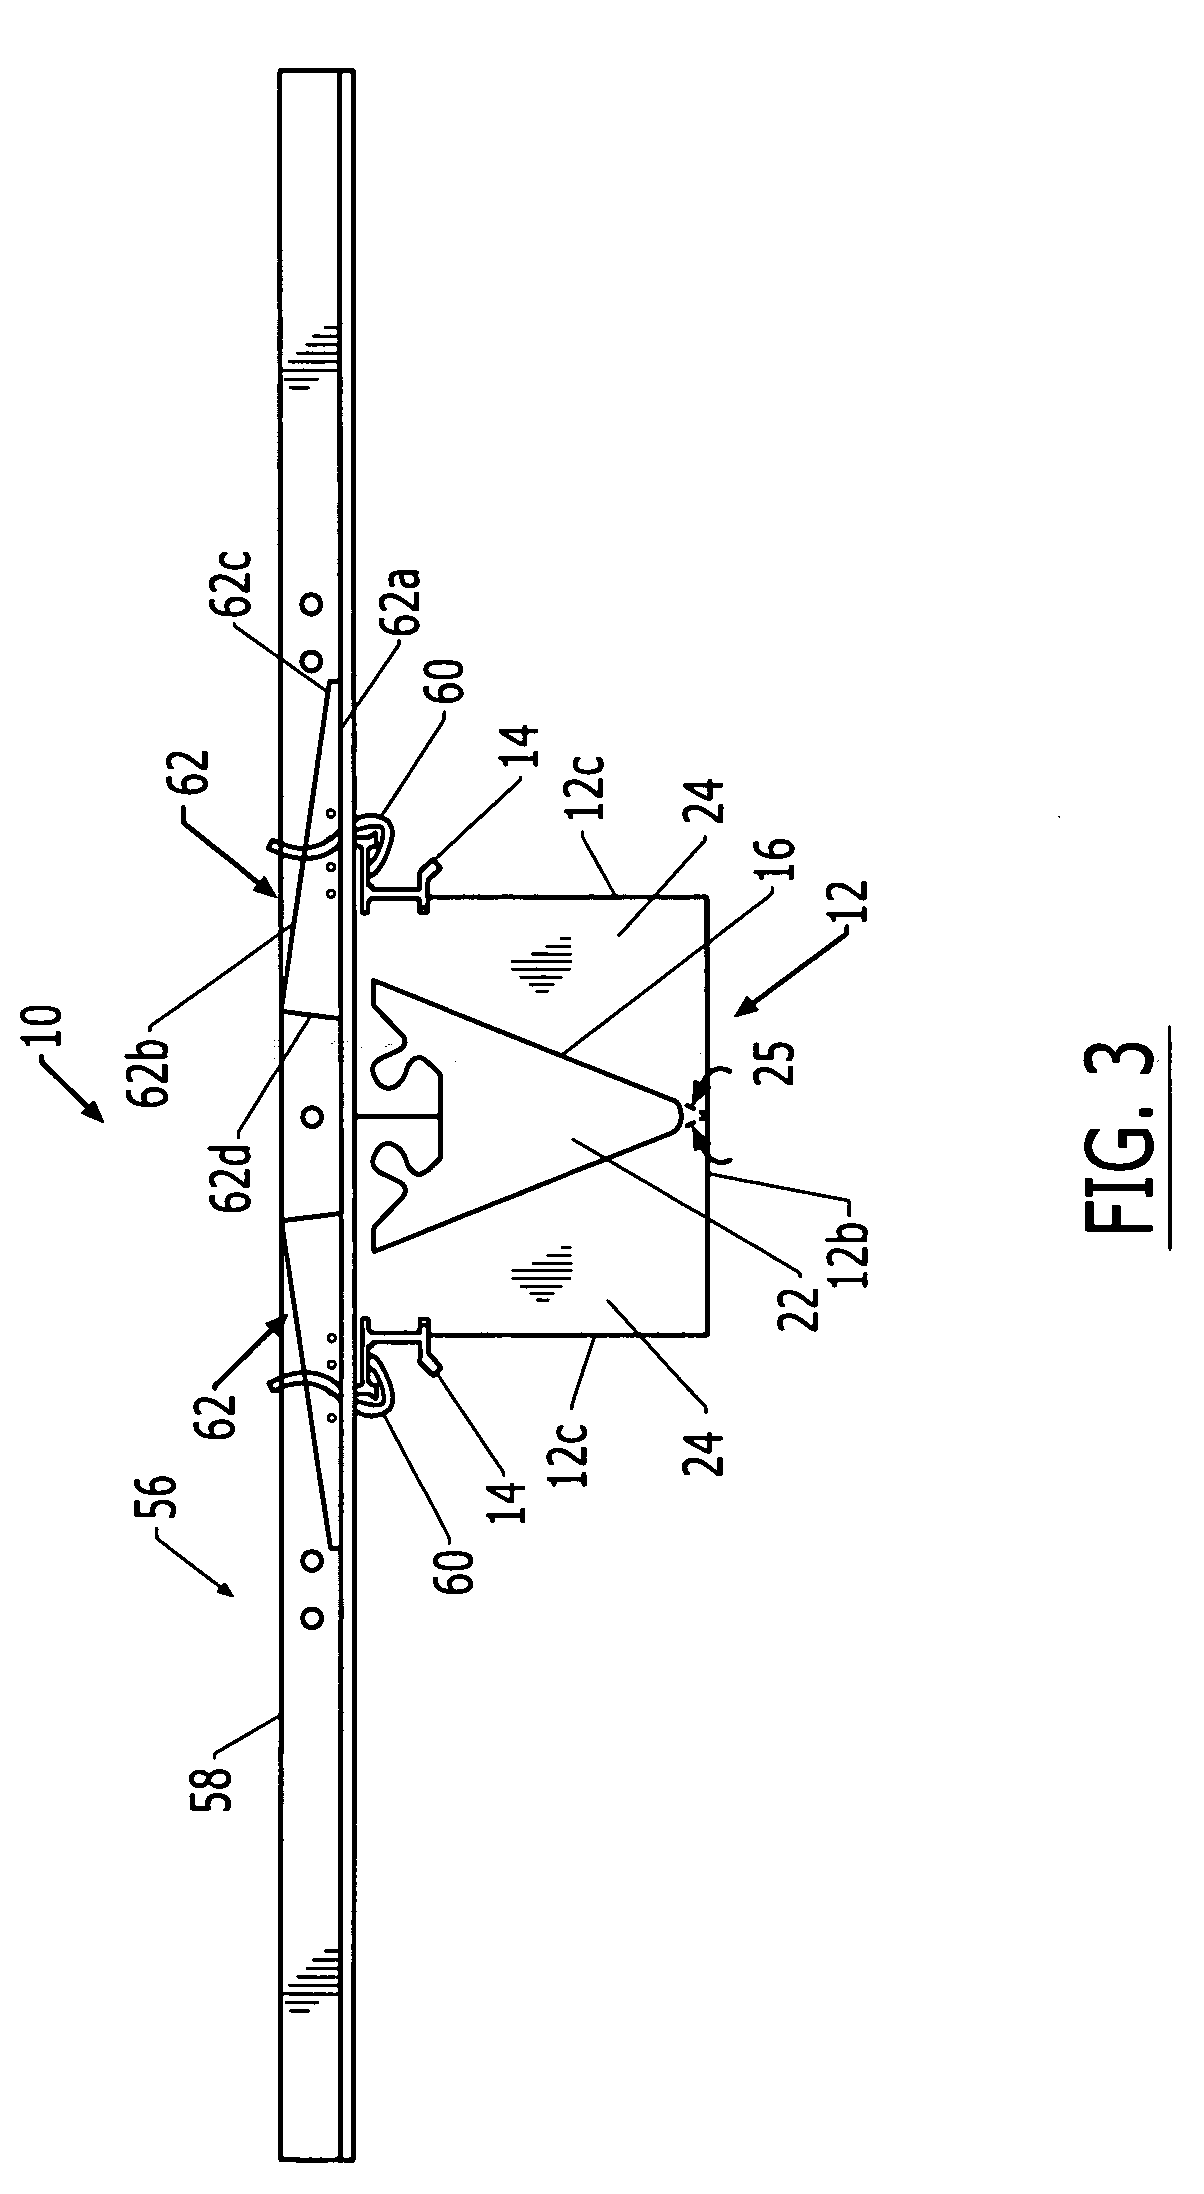 Method of fabricating a longitudinal frame member of a trench-forming assembly